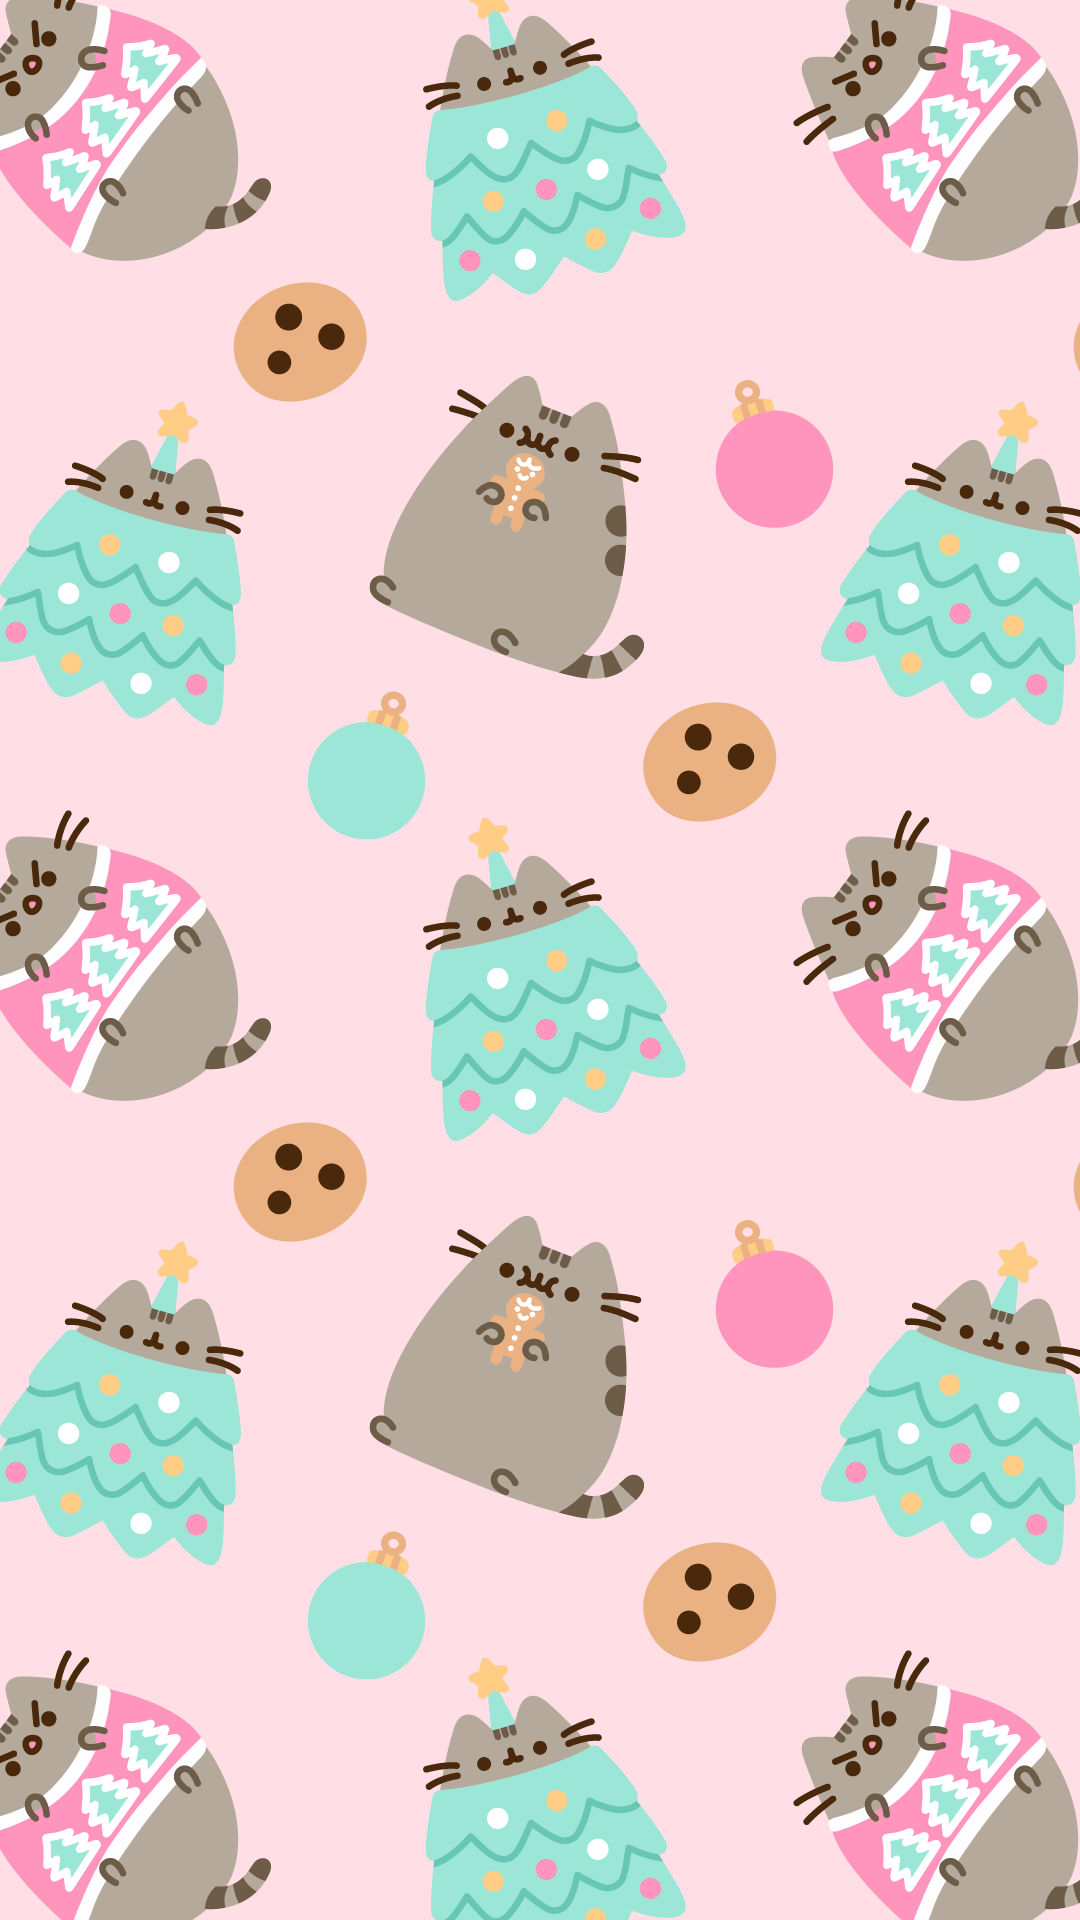 Go Into Gallery And Set As 'wallpaper' Pusheen